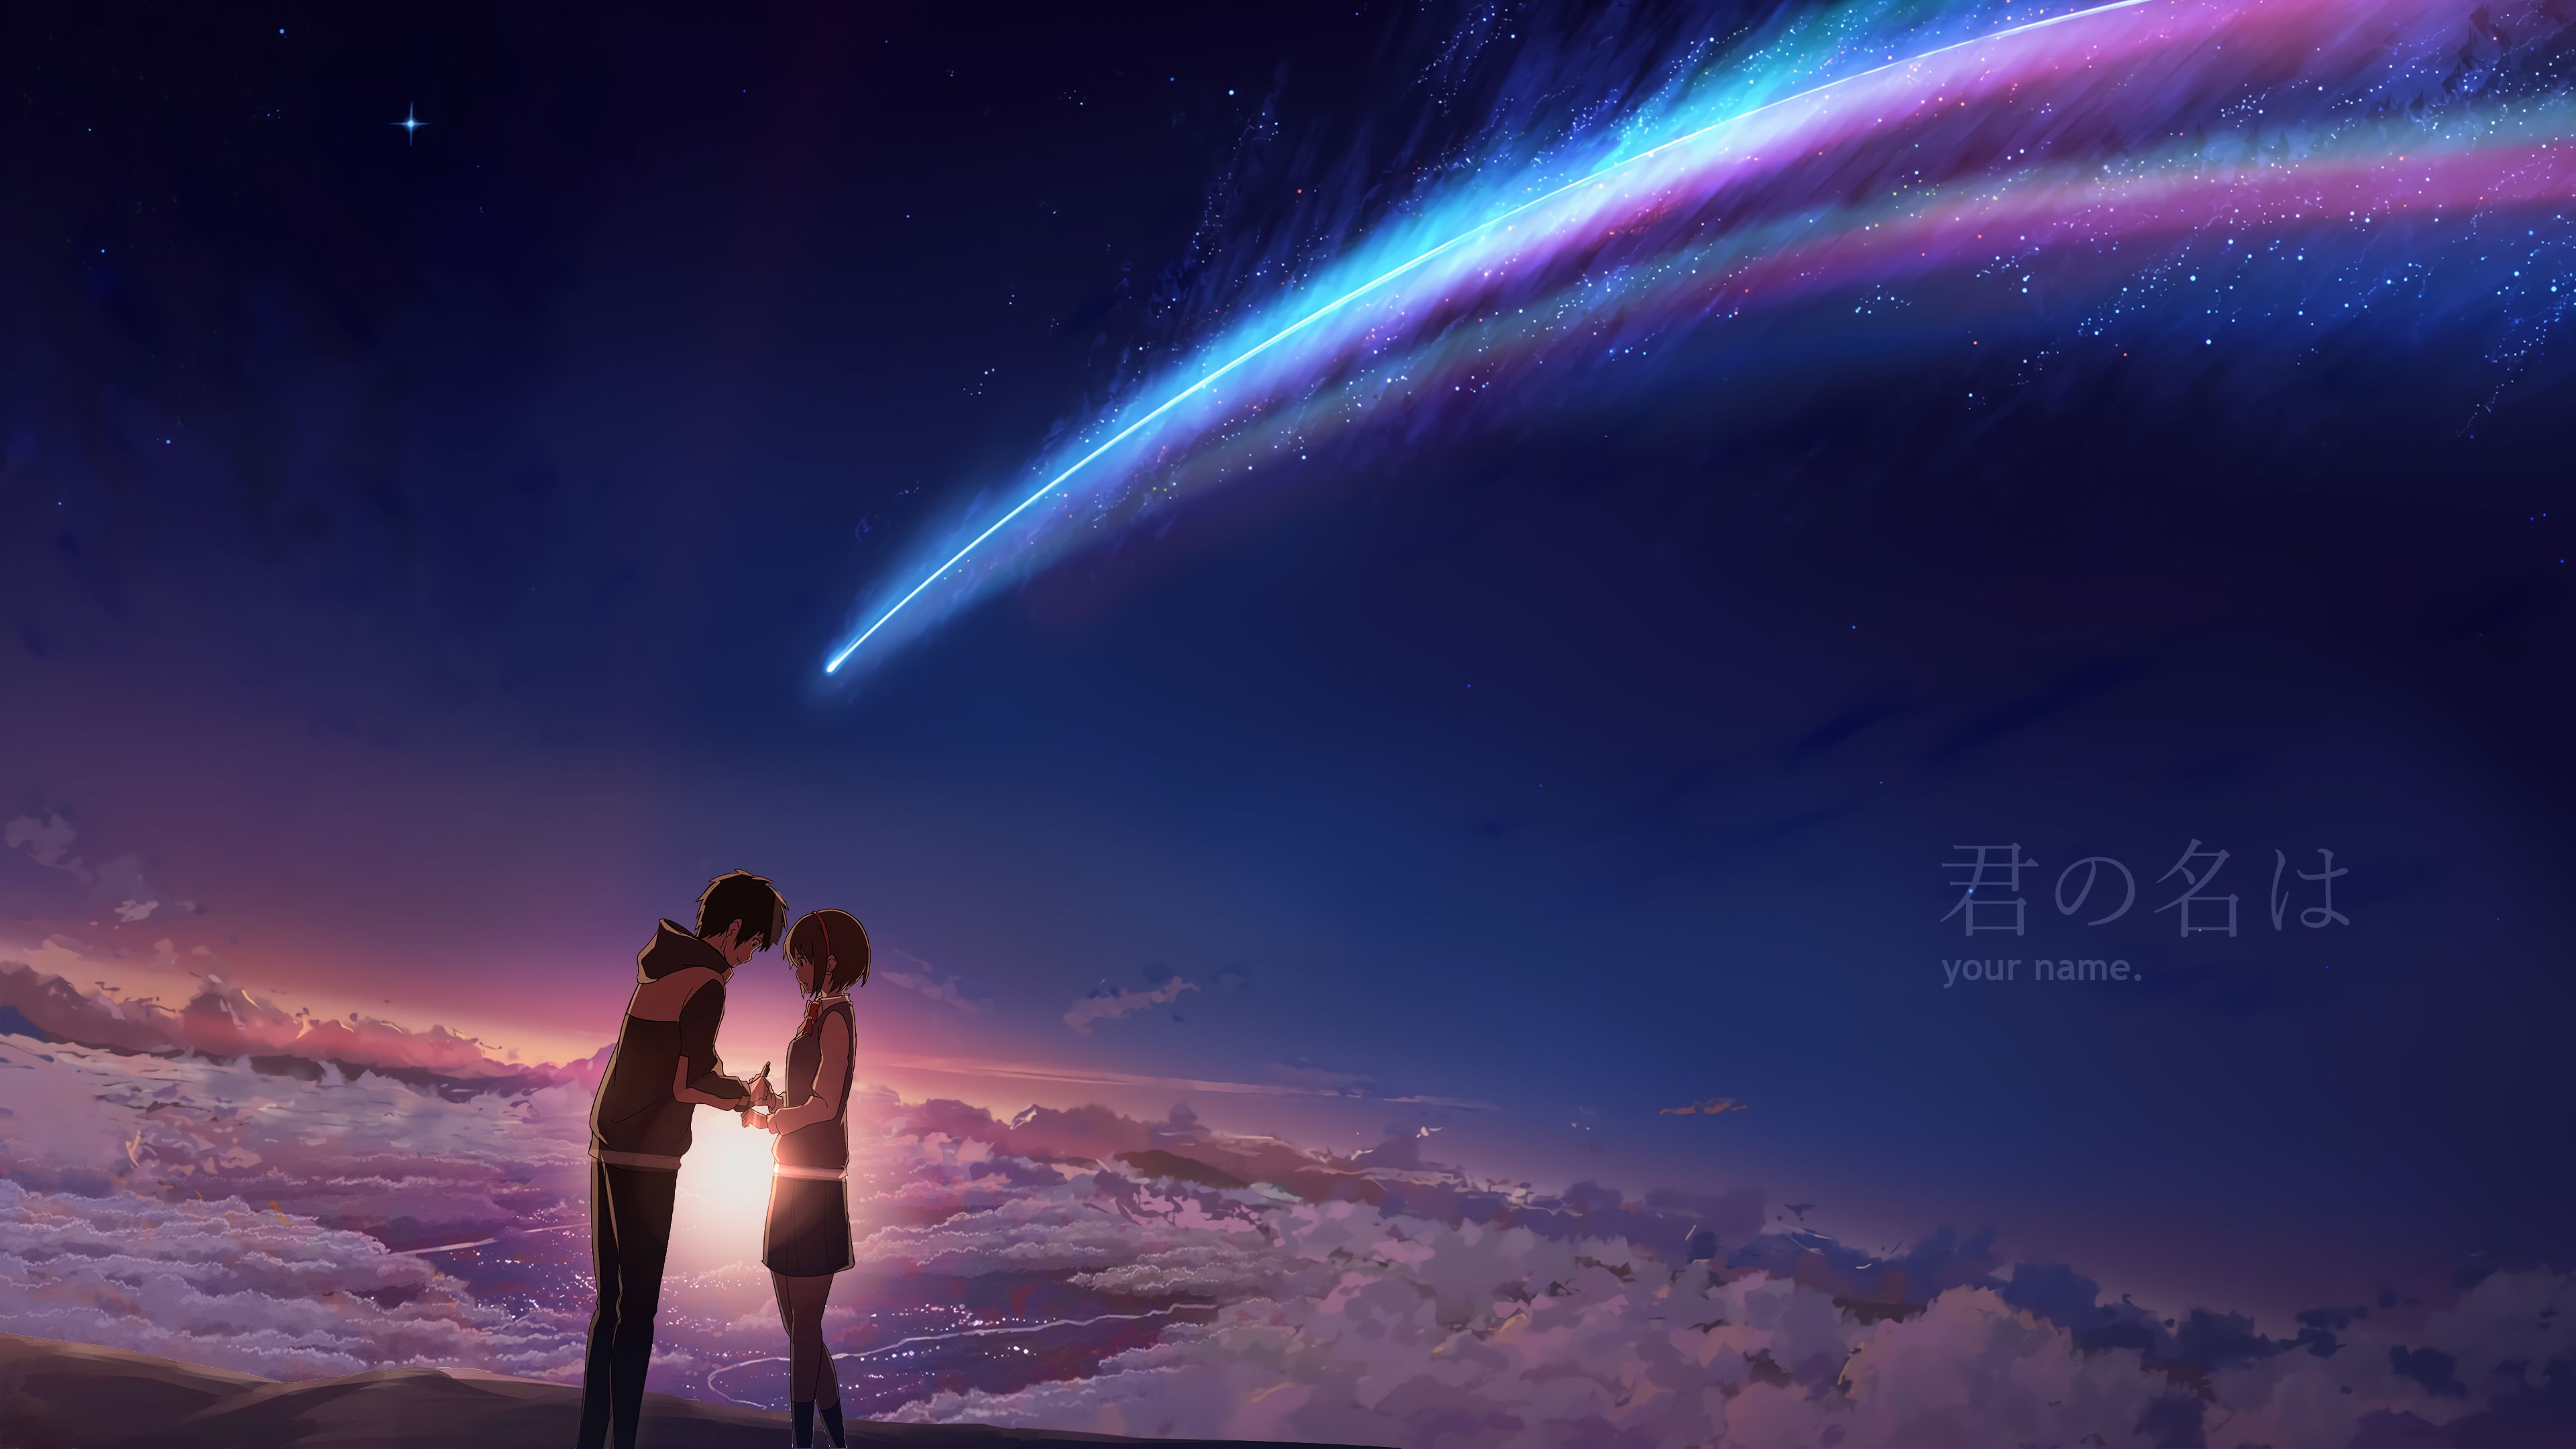 Your Name Anime HD Wallpaper Free Your Name Anime HD Background